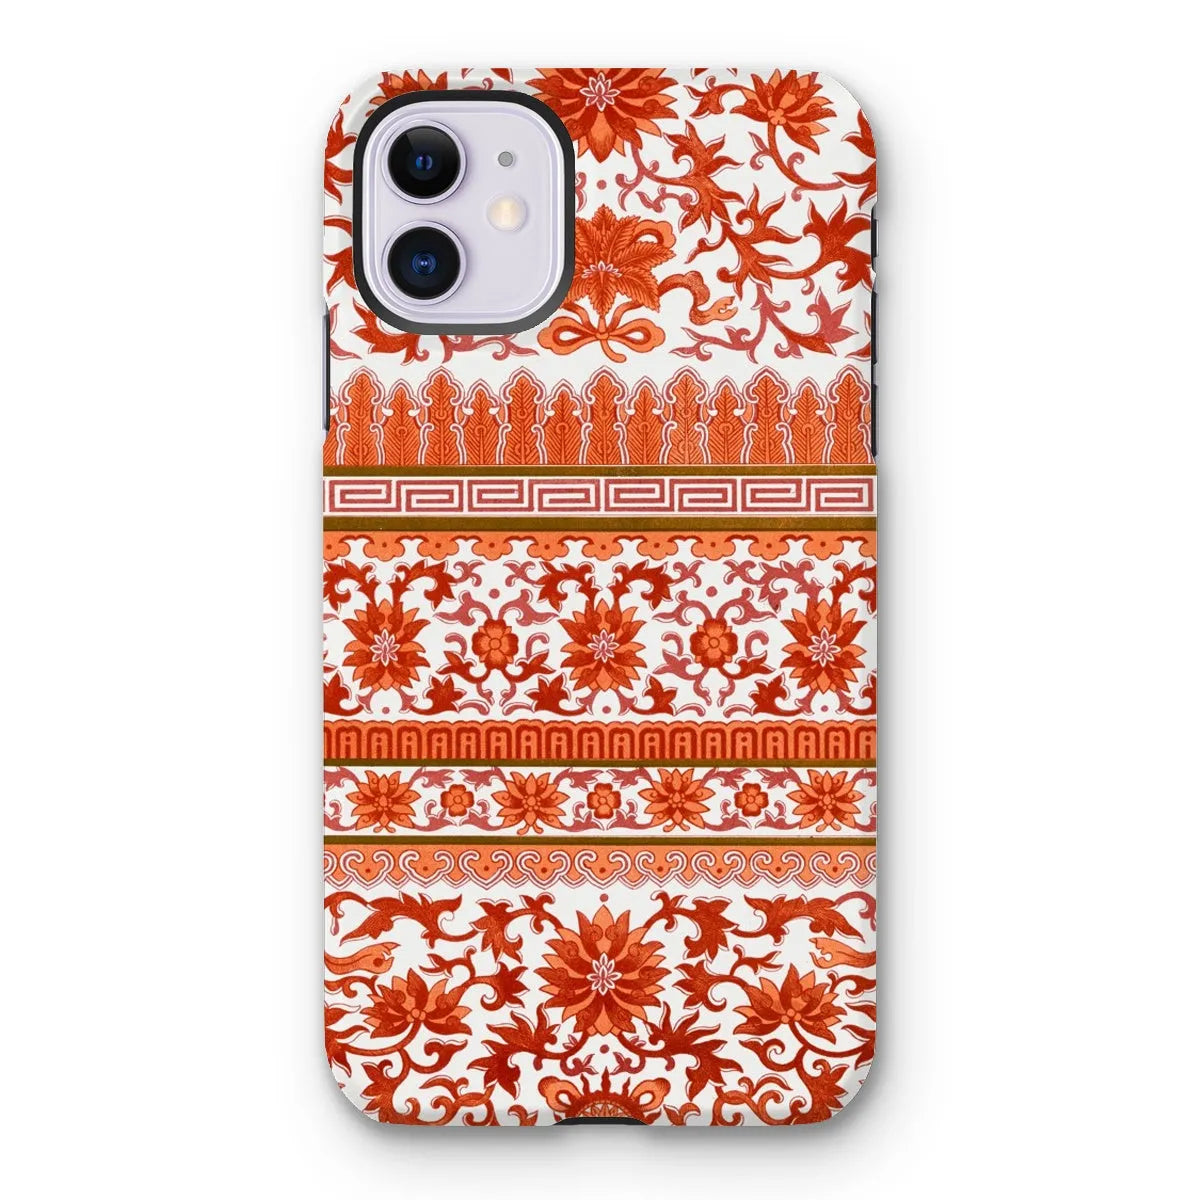 Fiery Chinese Floral Aesthetic Art Phone Case - Owen Jones - Iphone 11 / Matte - Mobile Phone Cases - Aesthetic Art